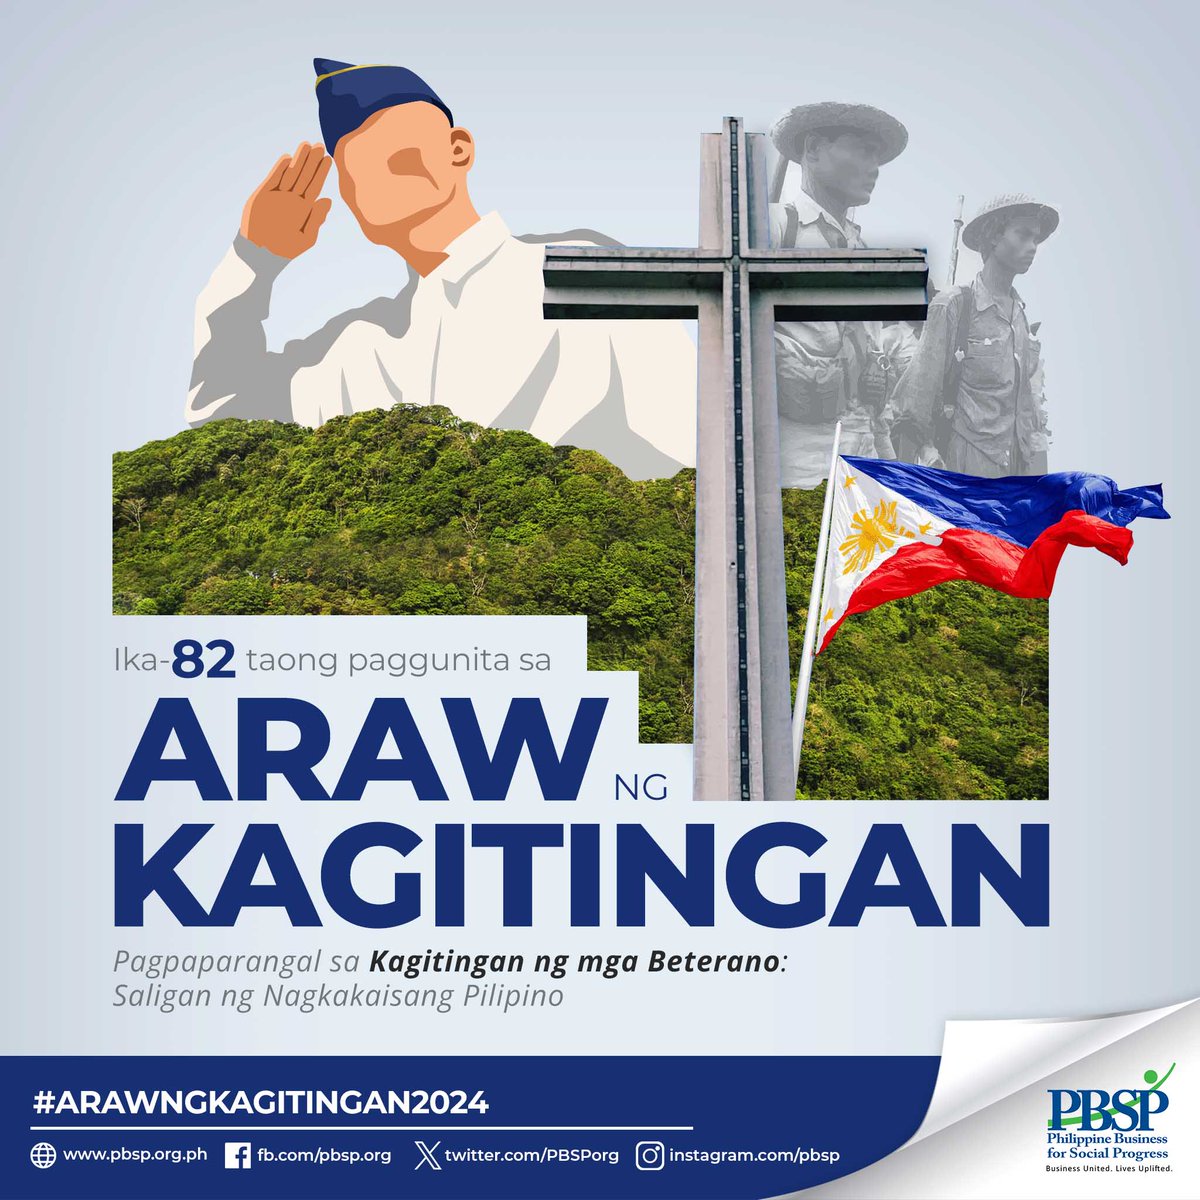 Today marks the 82nd anniversary of 'Araw ng Kagitingan,' a day commemorating and honoring Filipinos who bravely fought against all forms of oppression and suppression during World War II. Proclamation 368, s. 2023 declares April 9 as a regular holiday. #ArawNgKagitingan #PBSP